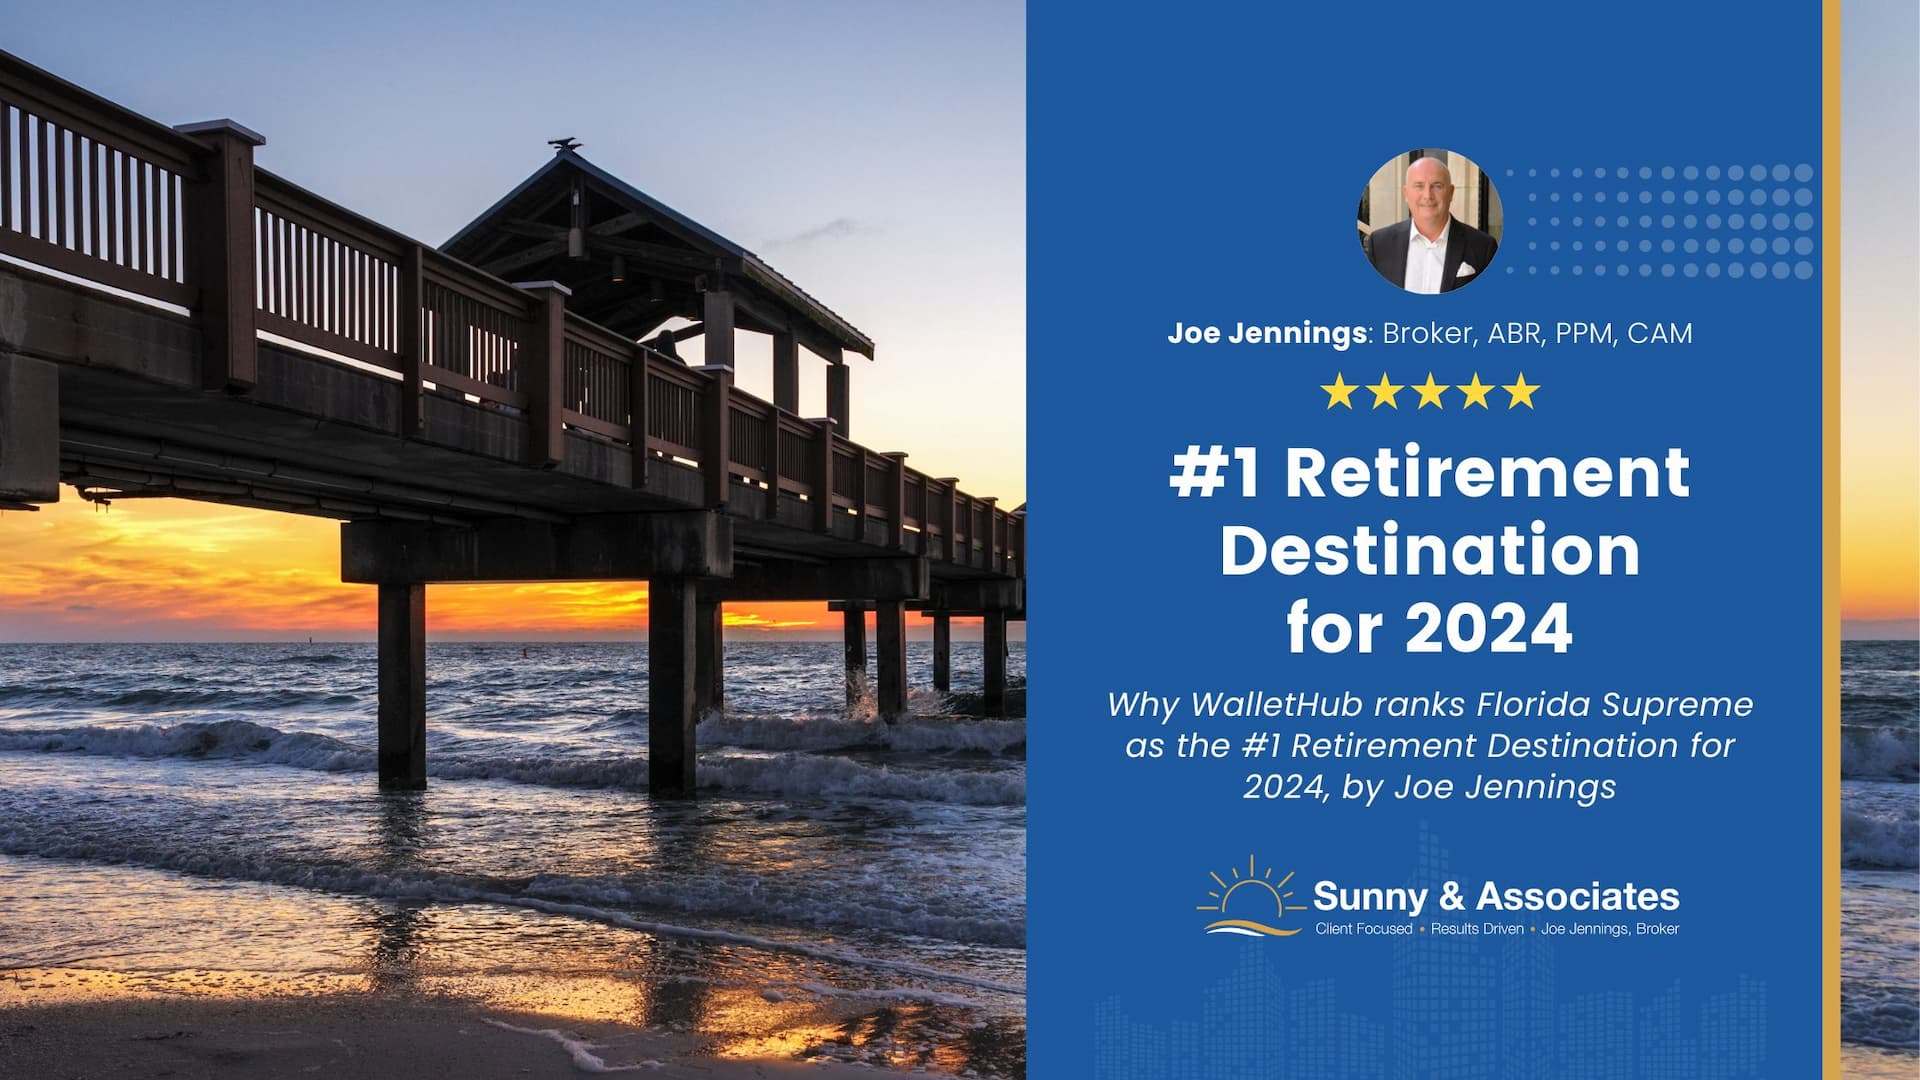 Why WalletHub ranks Florida Supreme as the 1 Retirement Destination for 2024